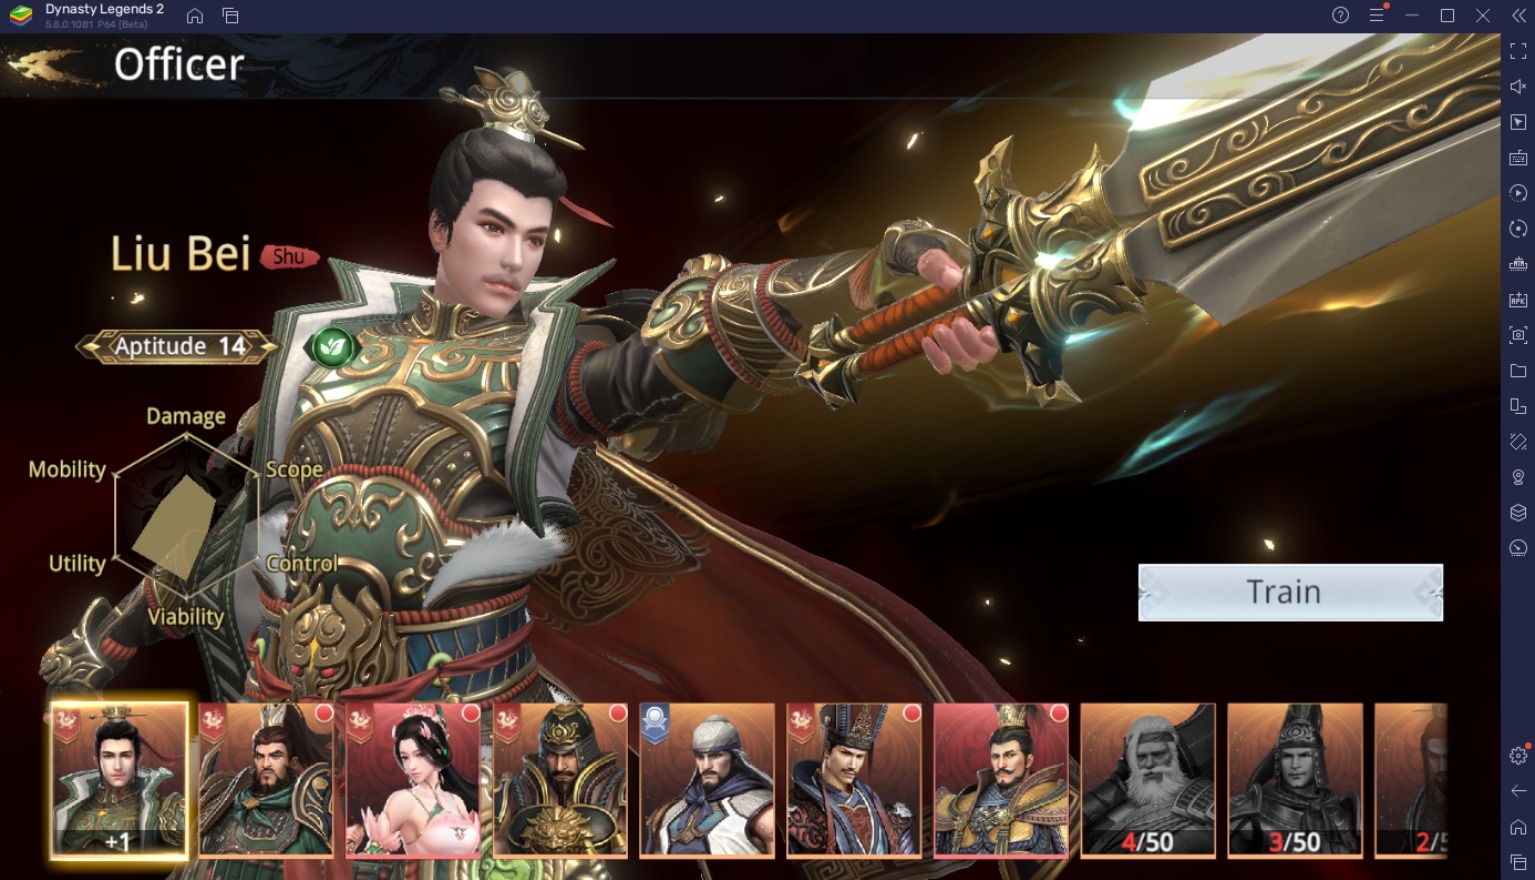 BlueStacks' Beginners Guide to Playing Dynasty Legends 2